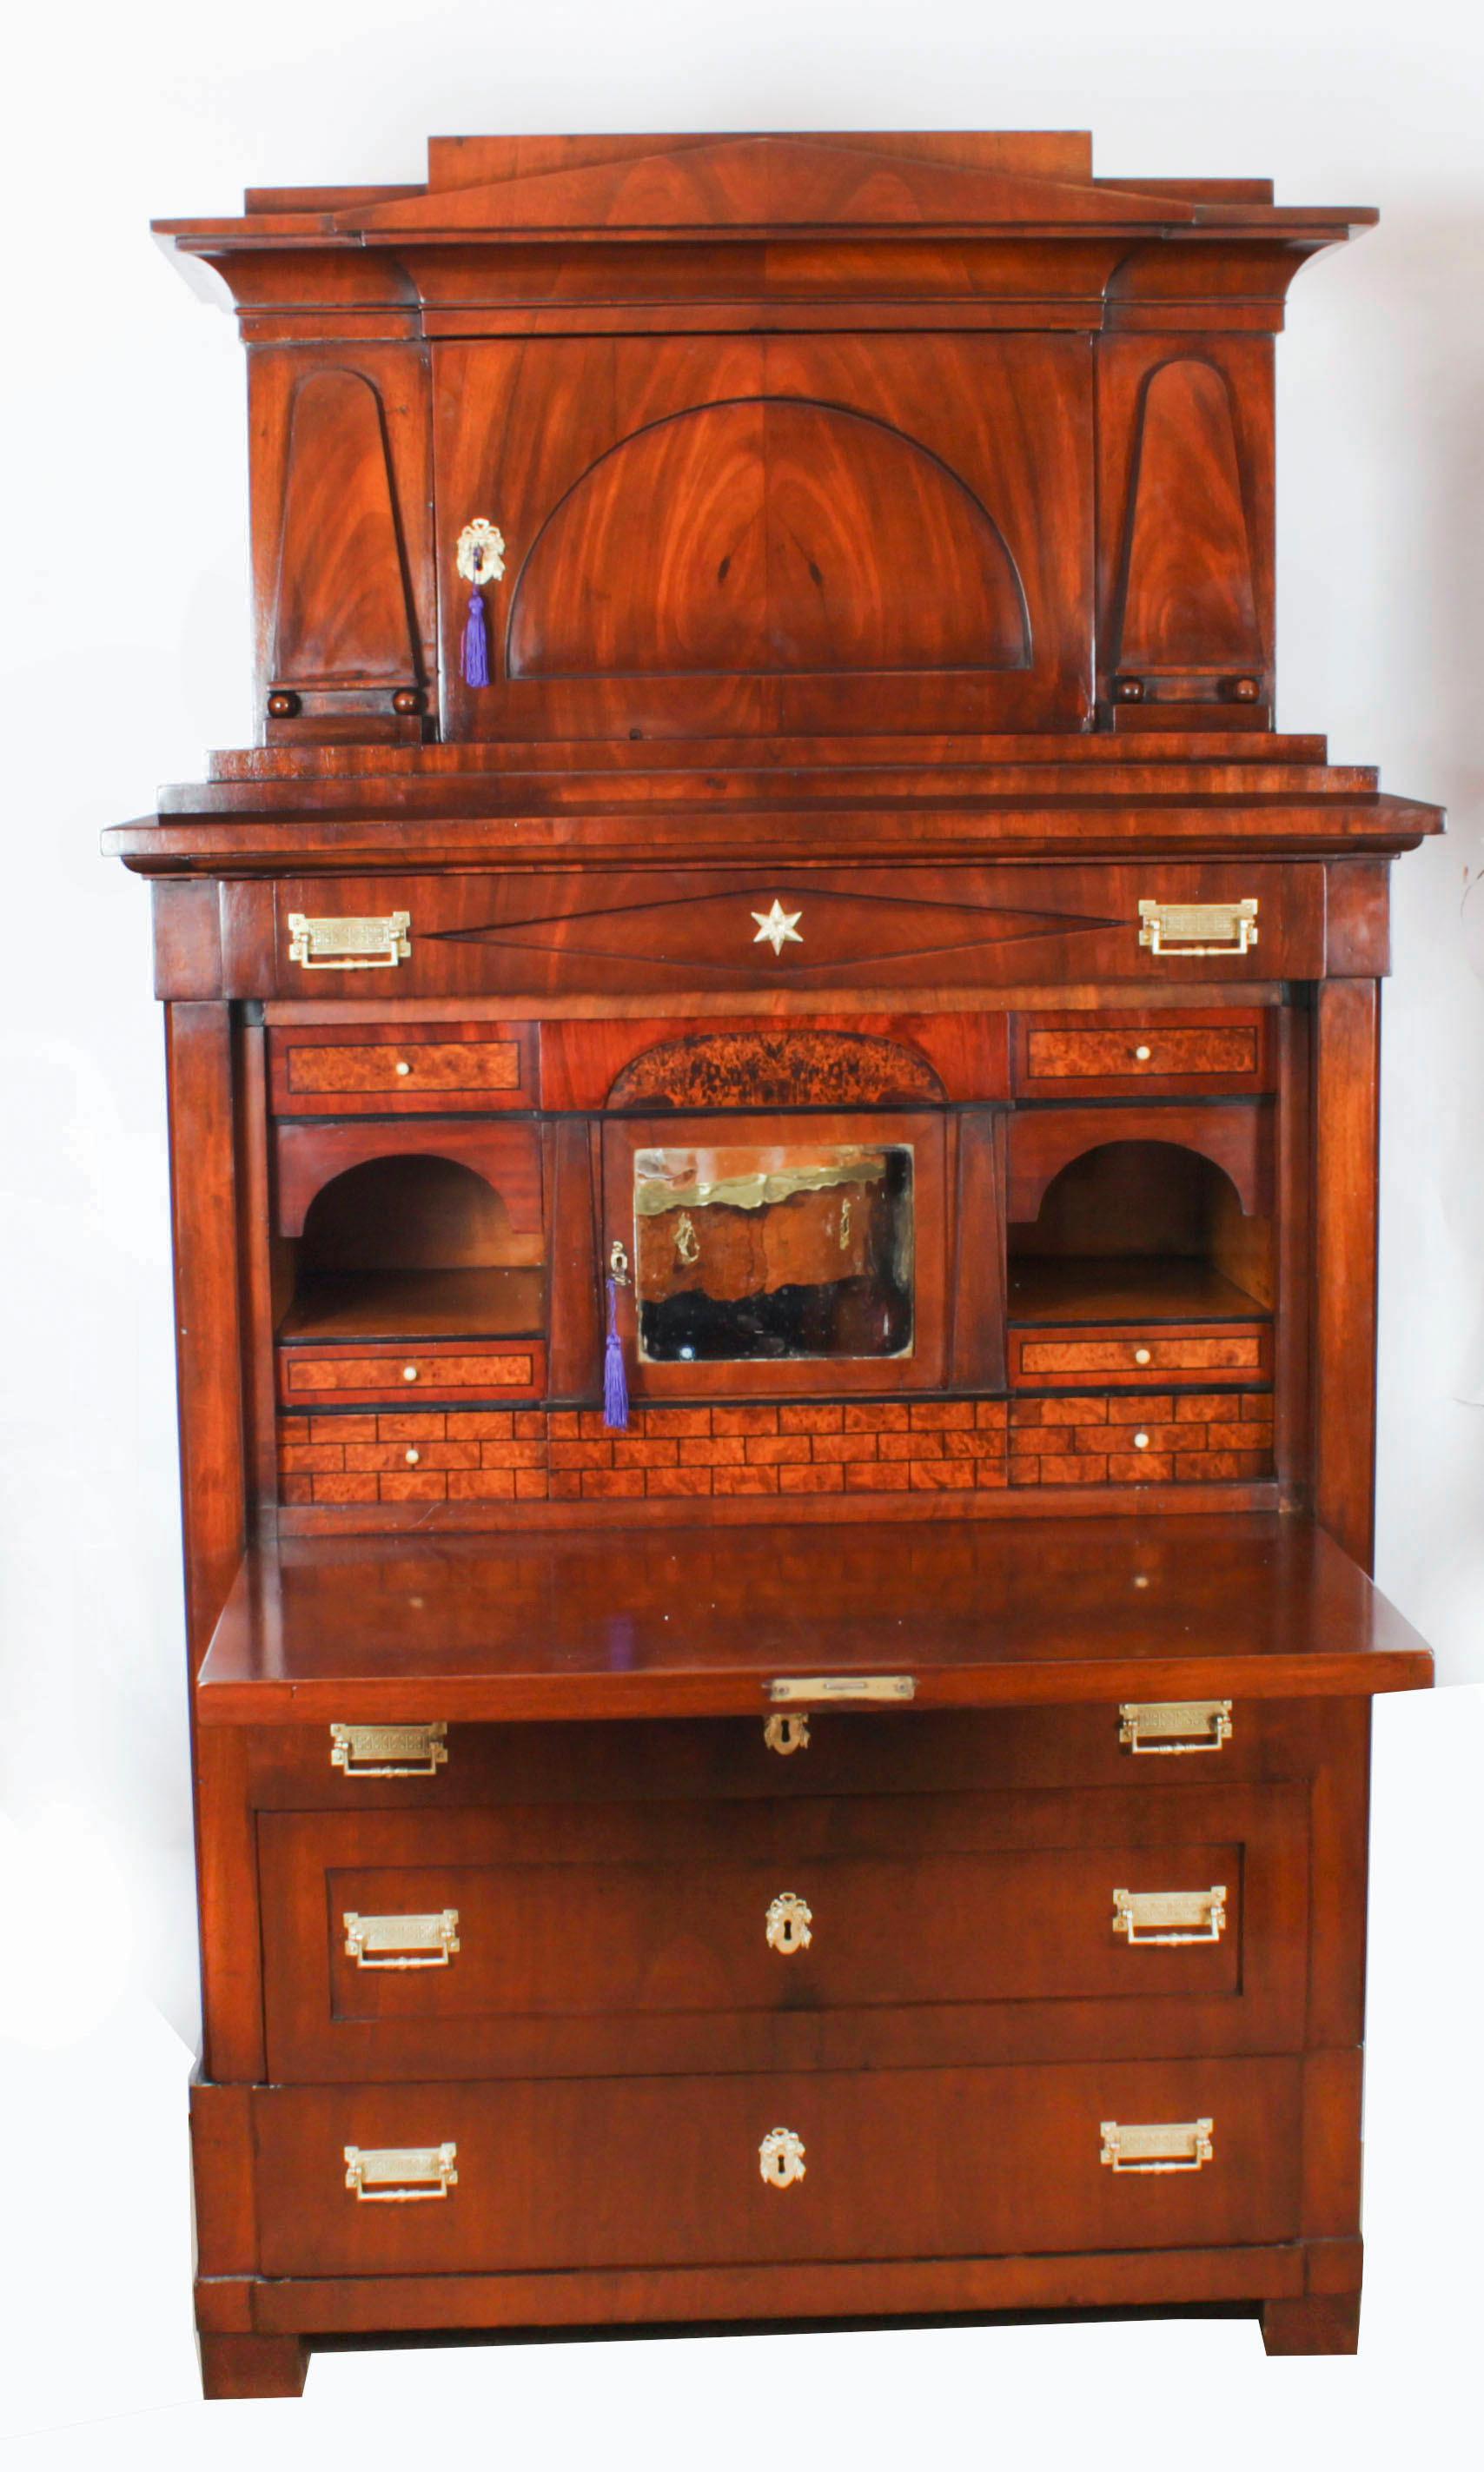 A truly magnificent antique flame mahogany architectural biedermeier secretaire abattant, circa 1840 in date.

The top section with a projecting cornice over an arched panelled door enclosed by applied shaped mounts. The lower section with a